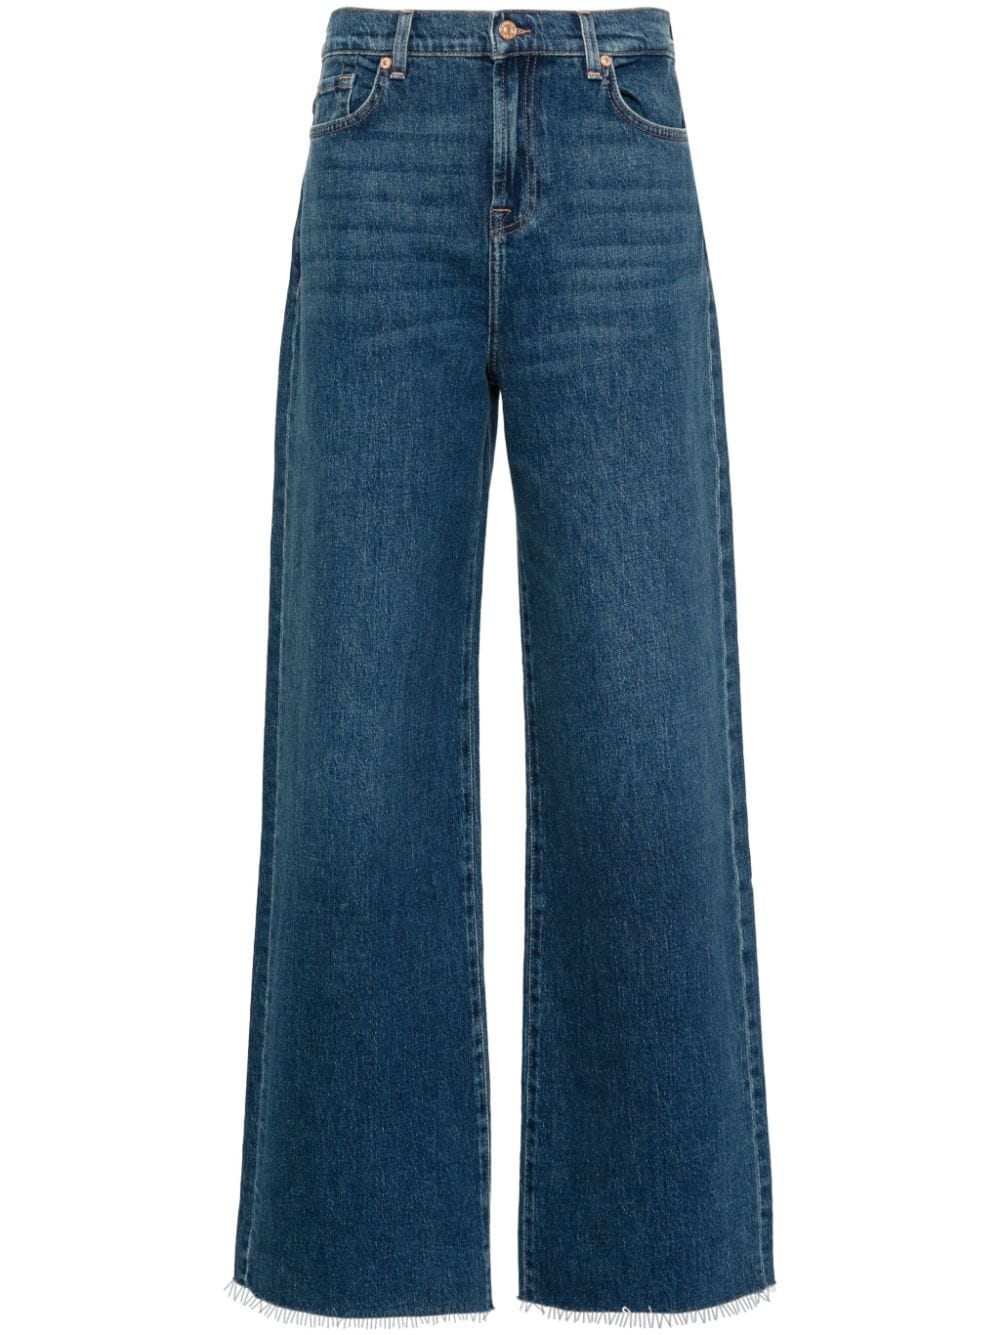 7 For All Mankind high-rise wide-leg jeans - Blue von 7 For All Mankind